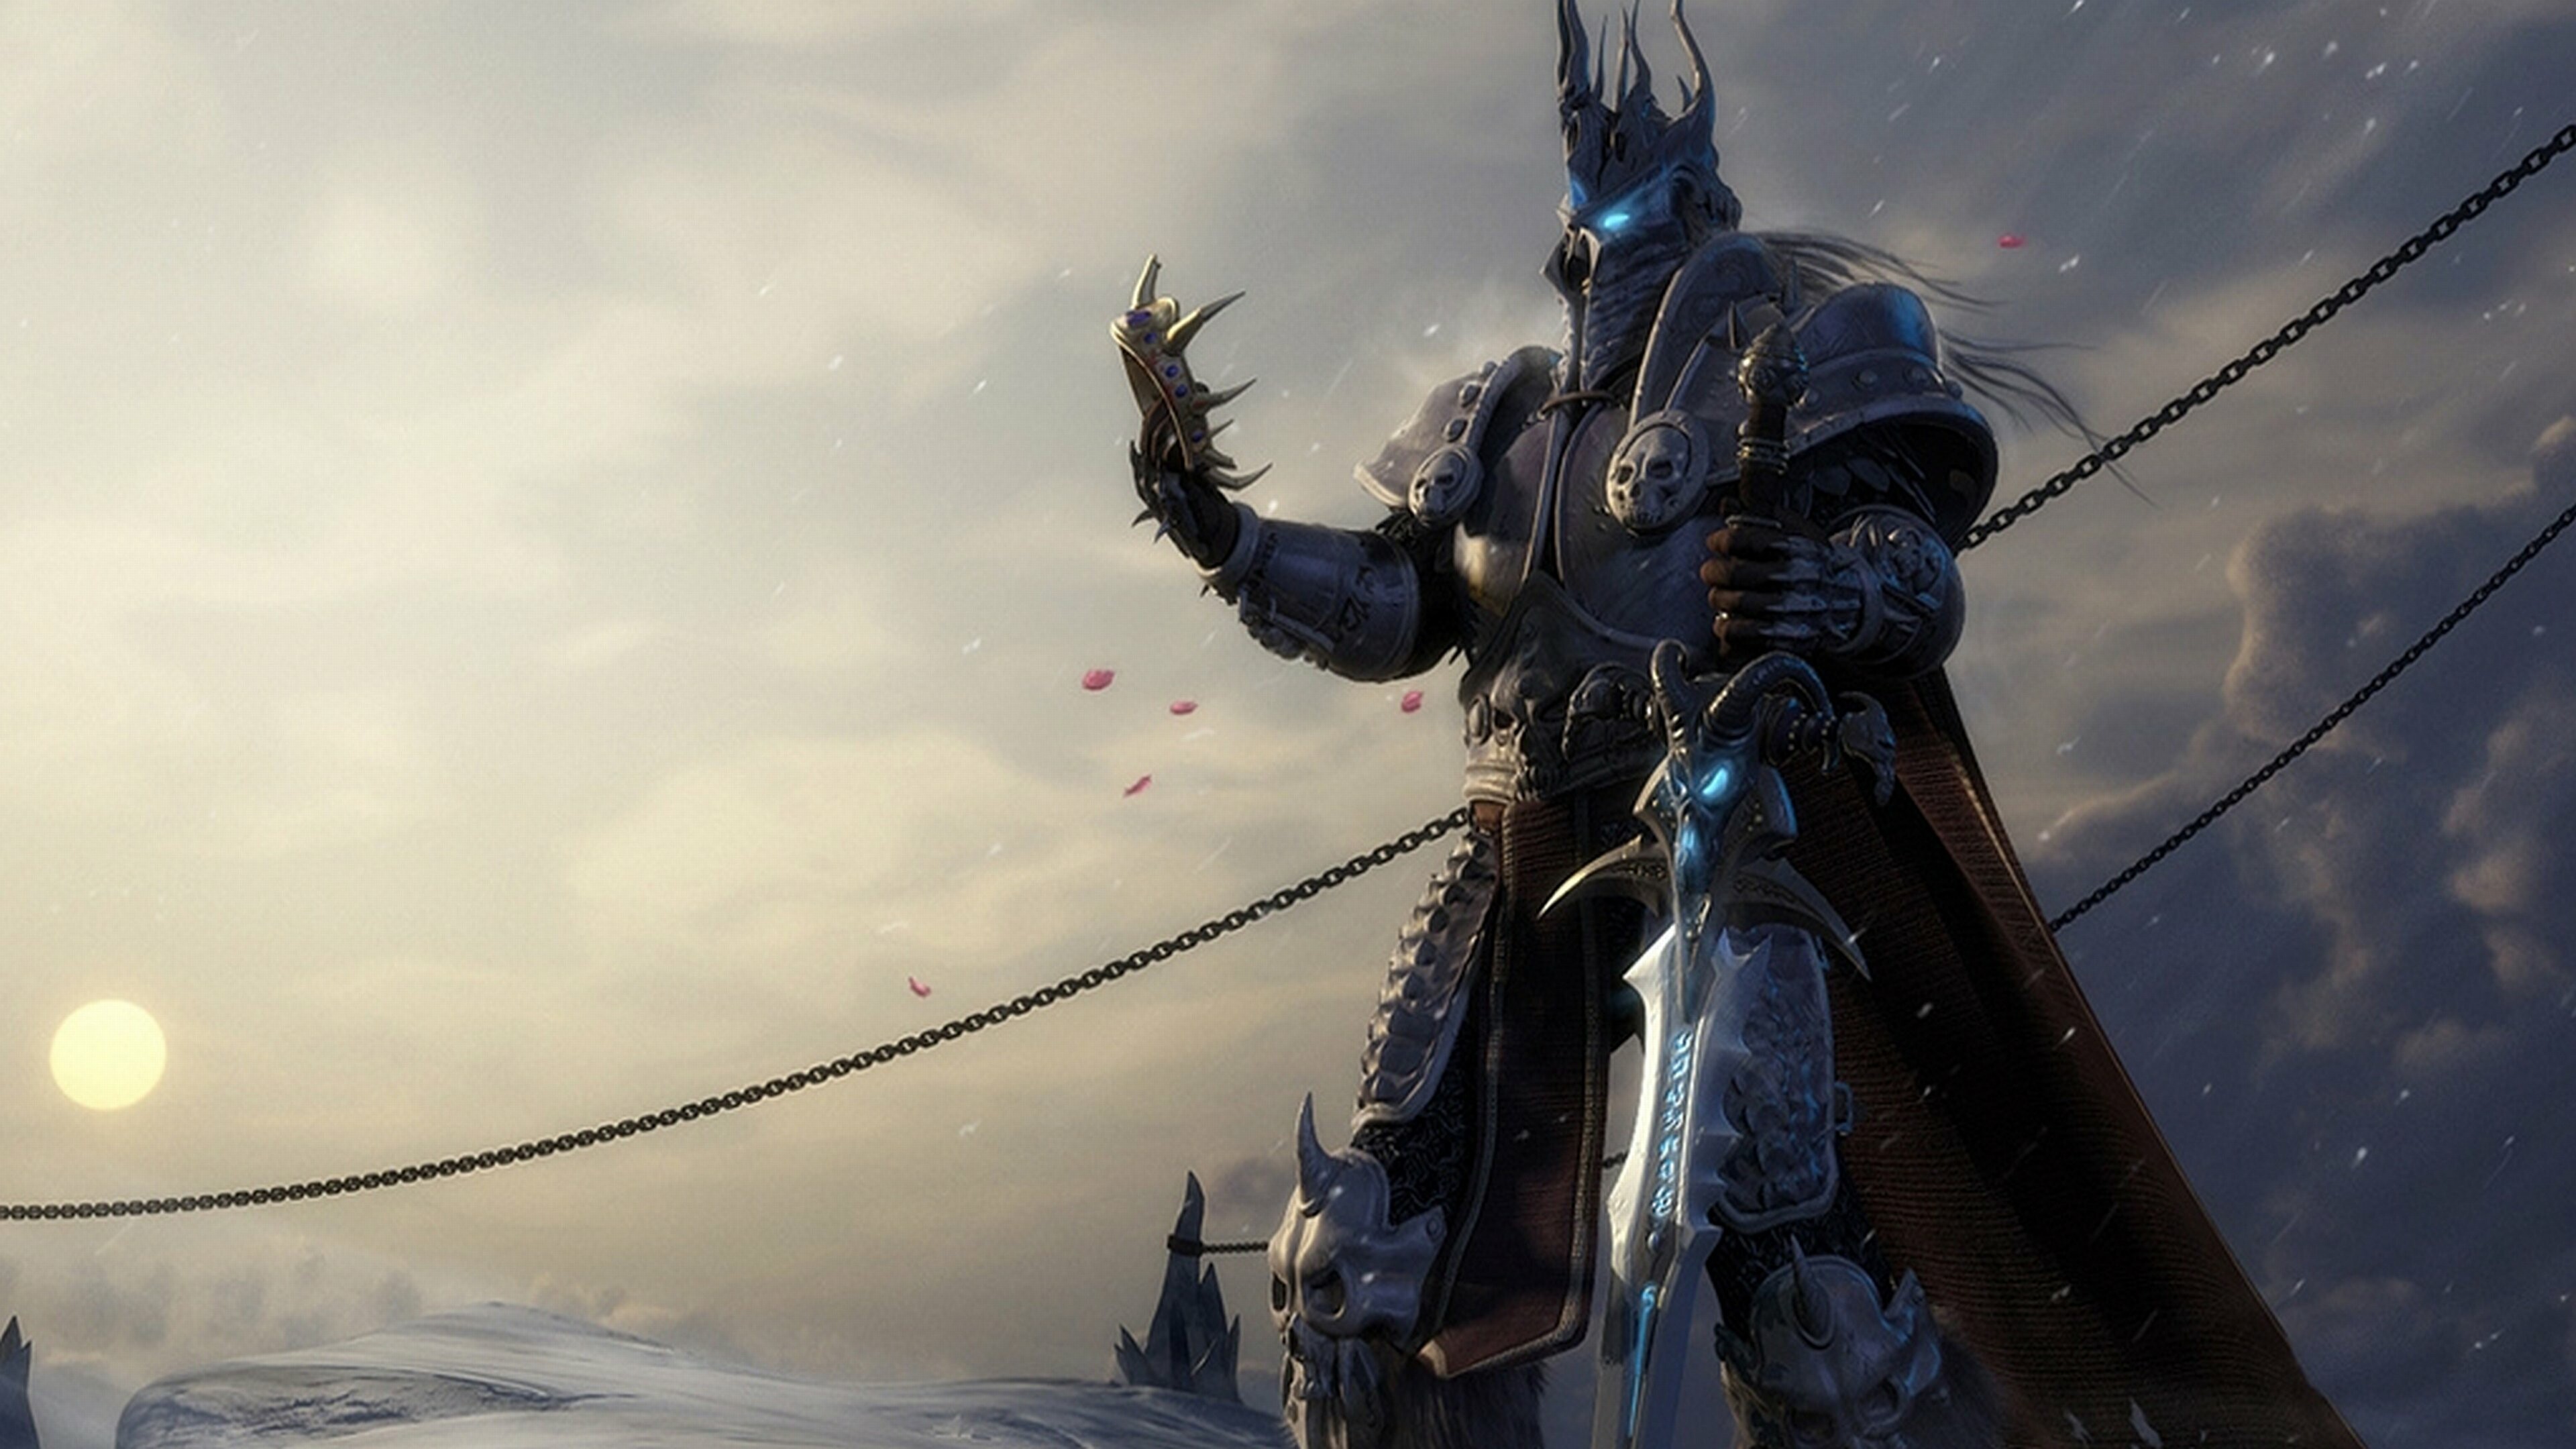 World of Warcraft: The Lich King, The Helm of Domination, Arthas. 3840x2160 4K Wallpaper.